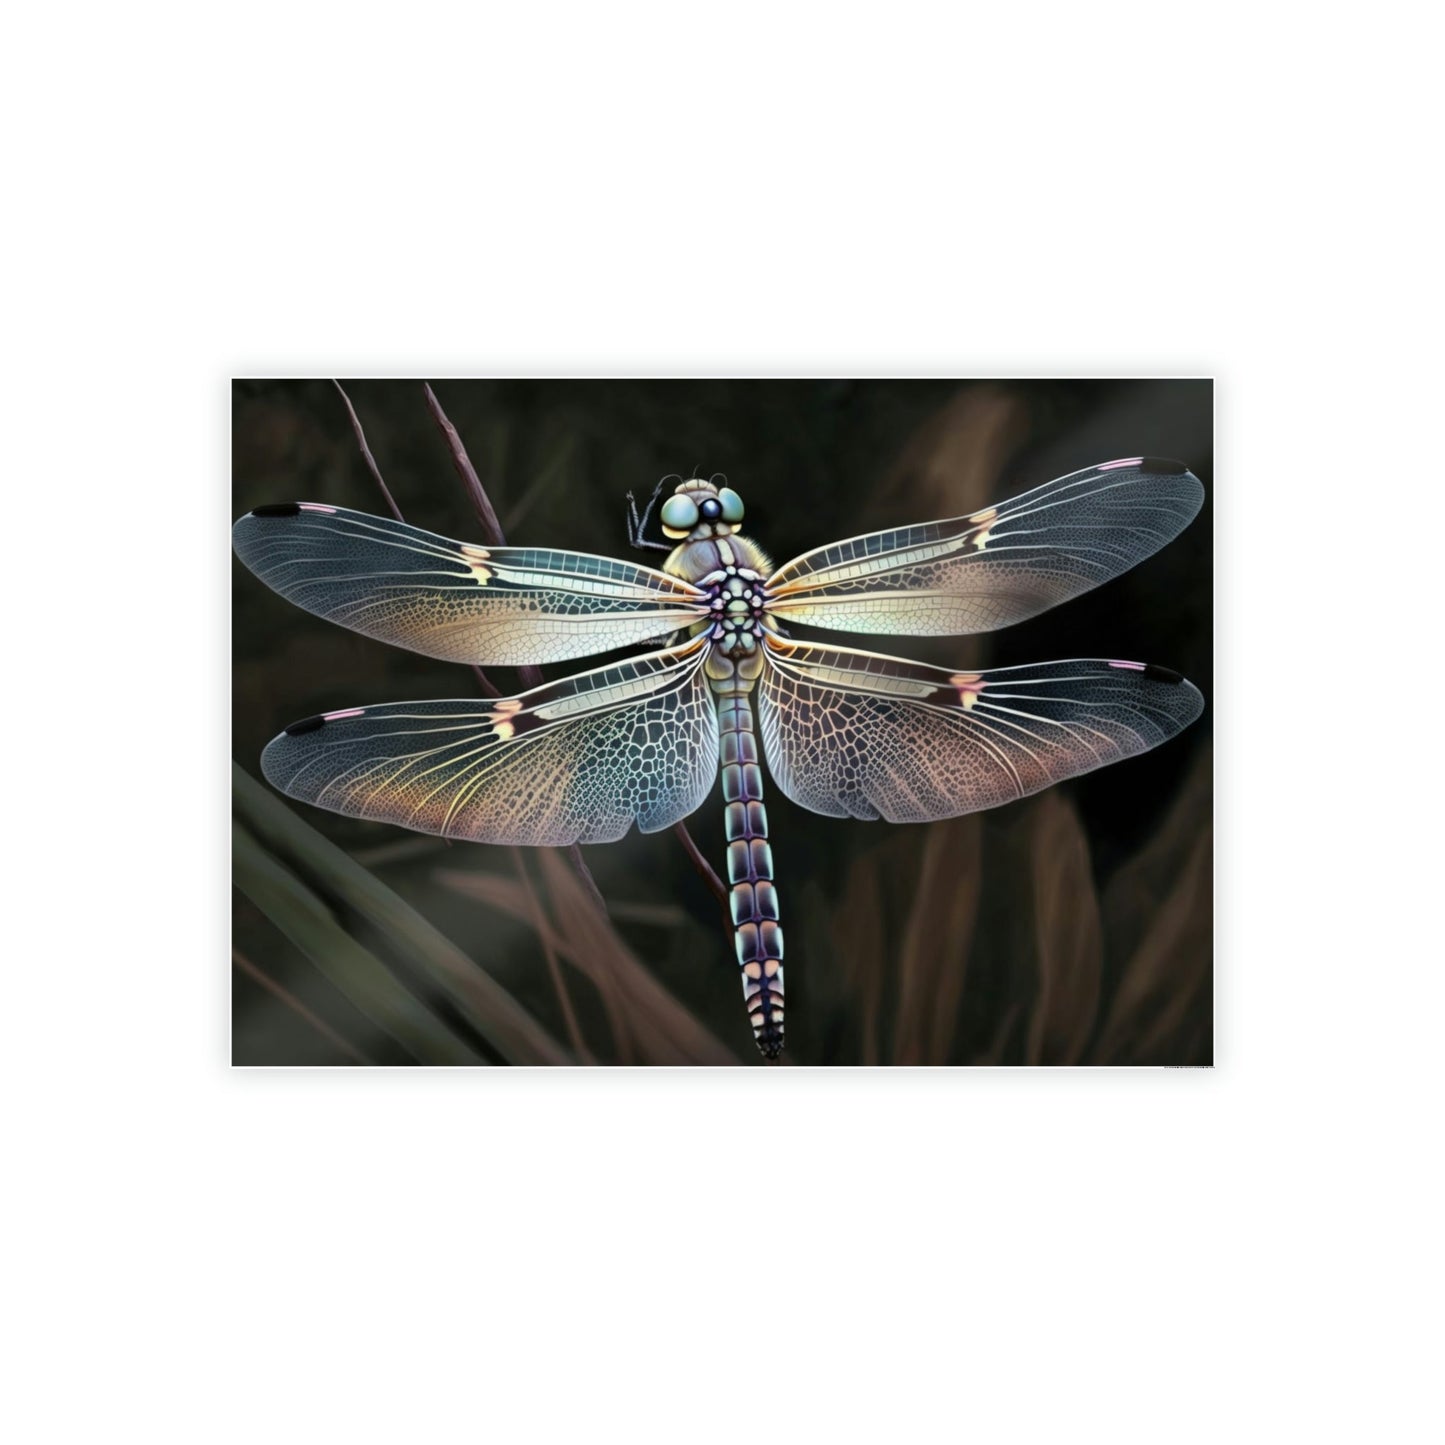 Dragonfly Delight: A Natural Canvas Print of Beautiful Insects